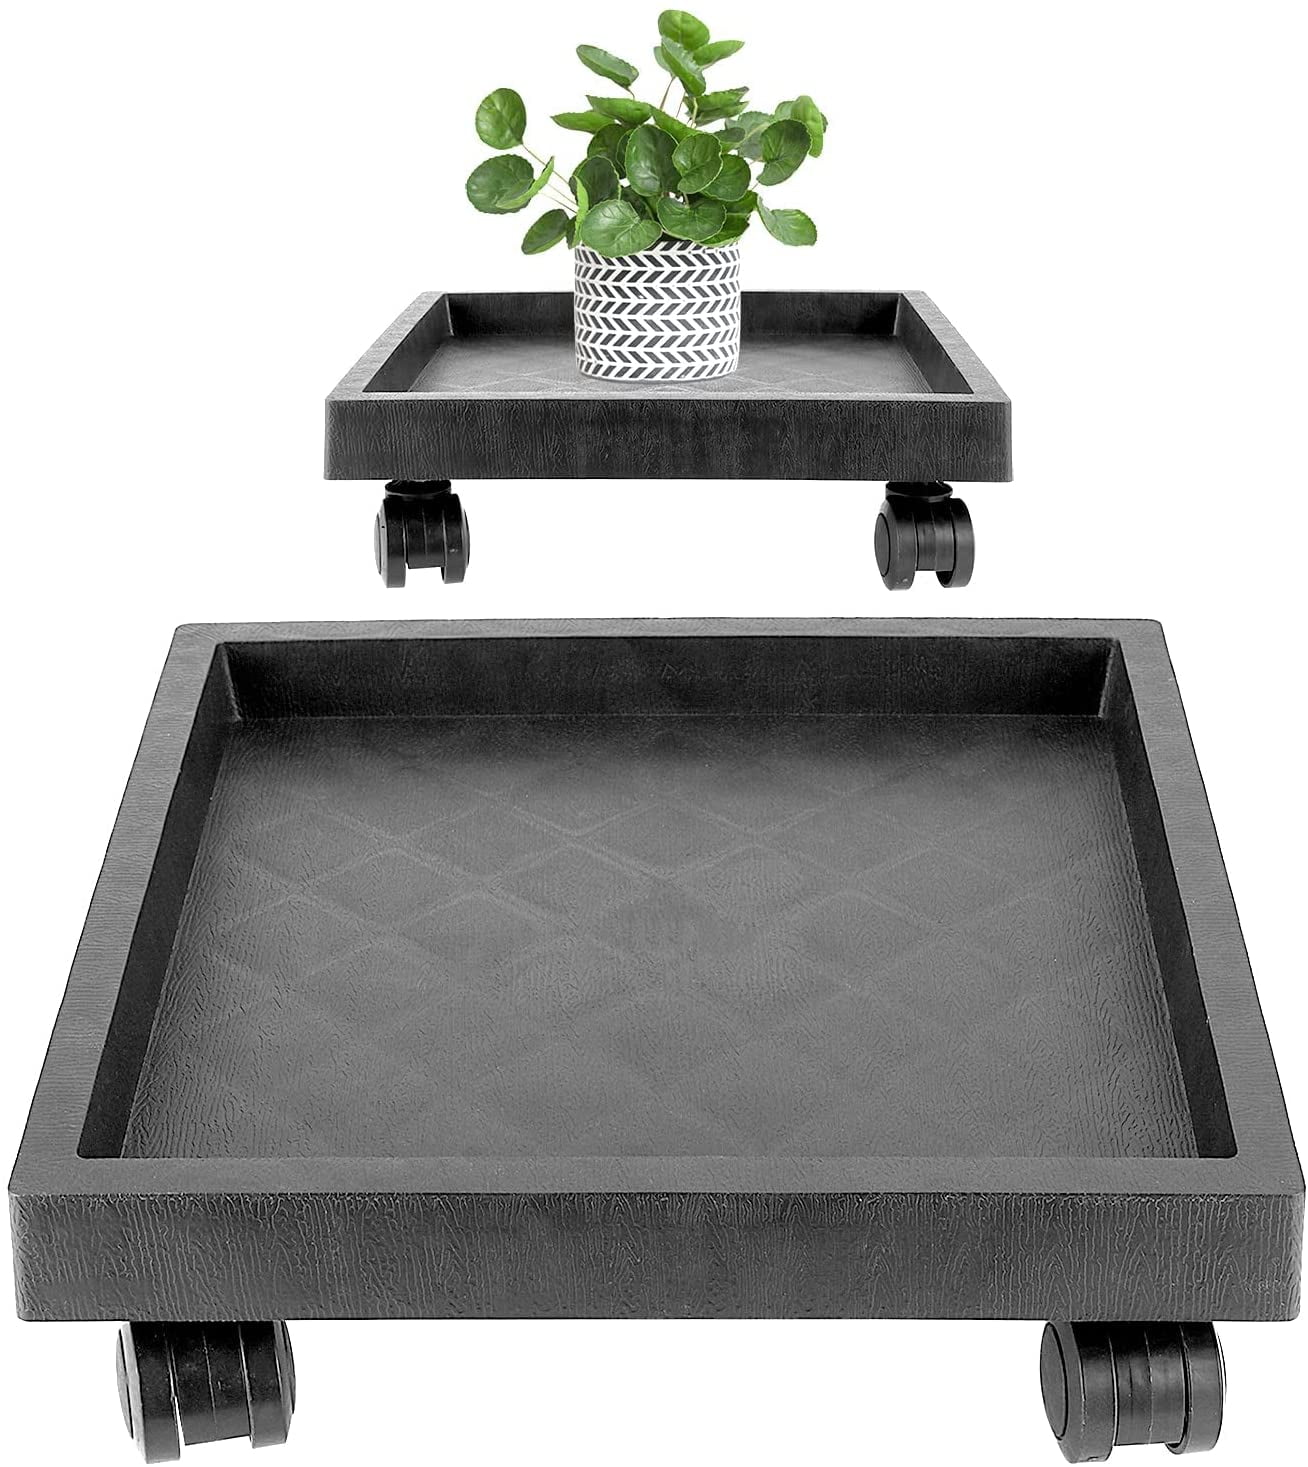 Black Circloophs 2 Packs Plastic Rolling Plant Caddy with Casters and Drainage Tray Heavy Duty 14 Plant Dolly with Universal Wheels for Moving Heavy Plant Pots Indoor and Outdoor 